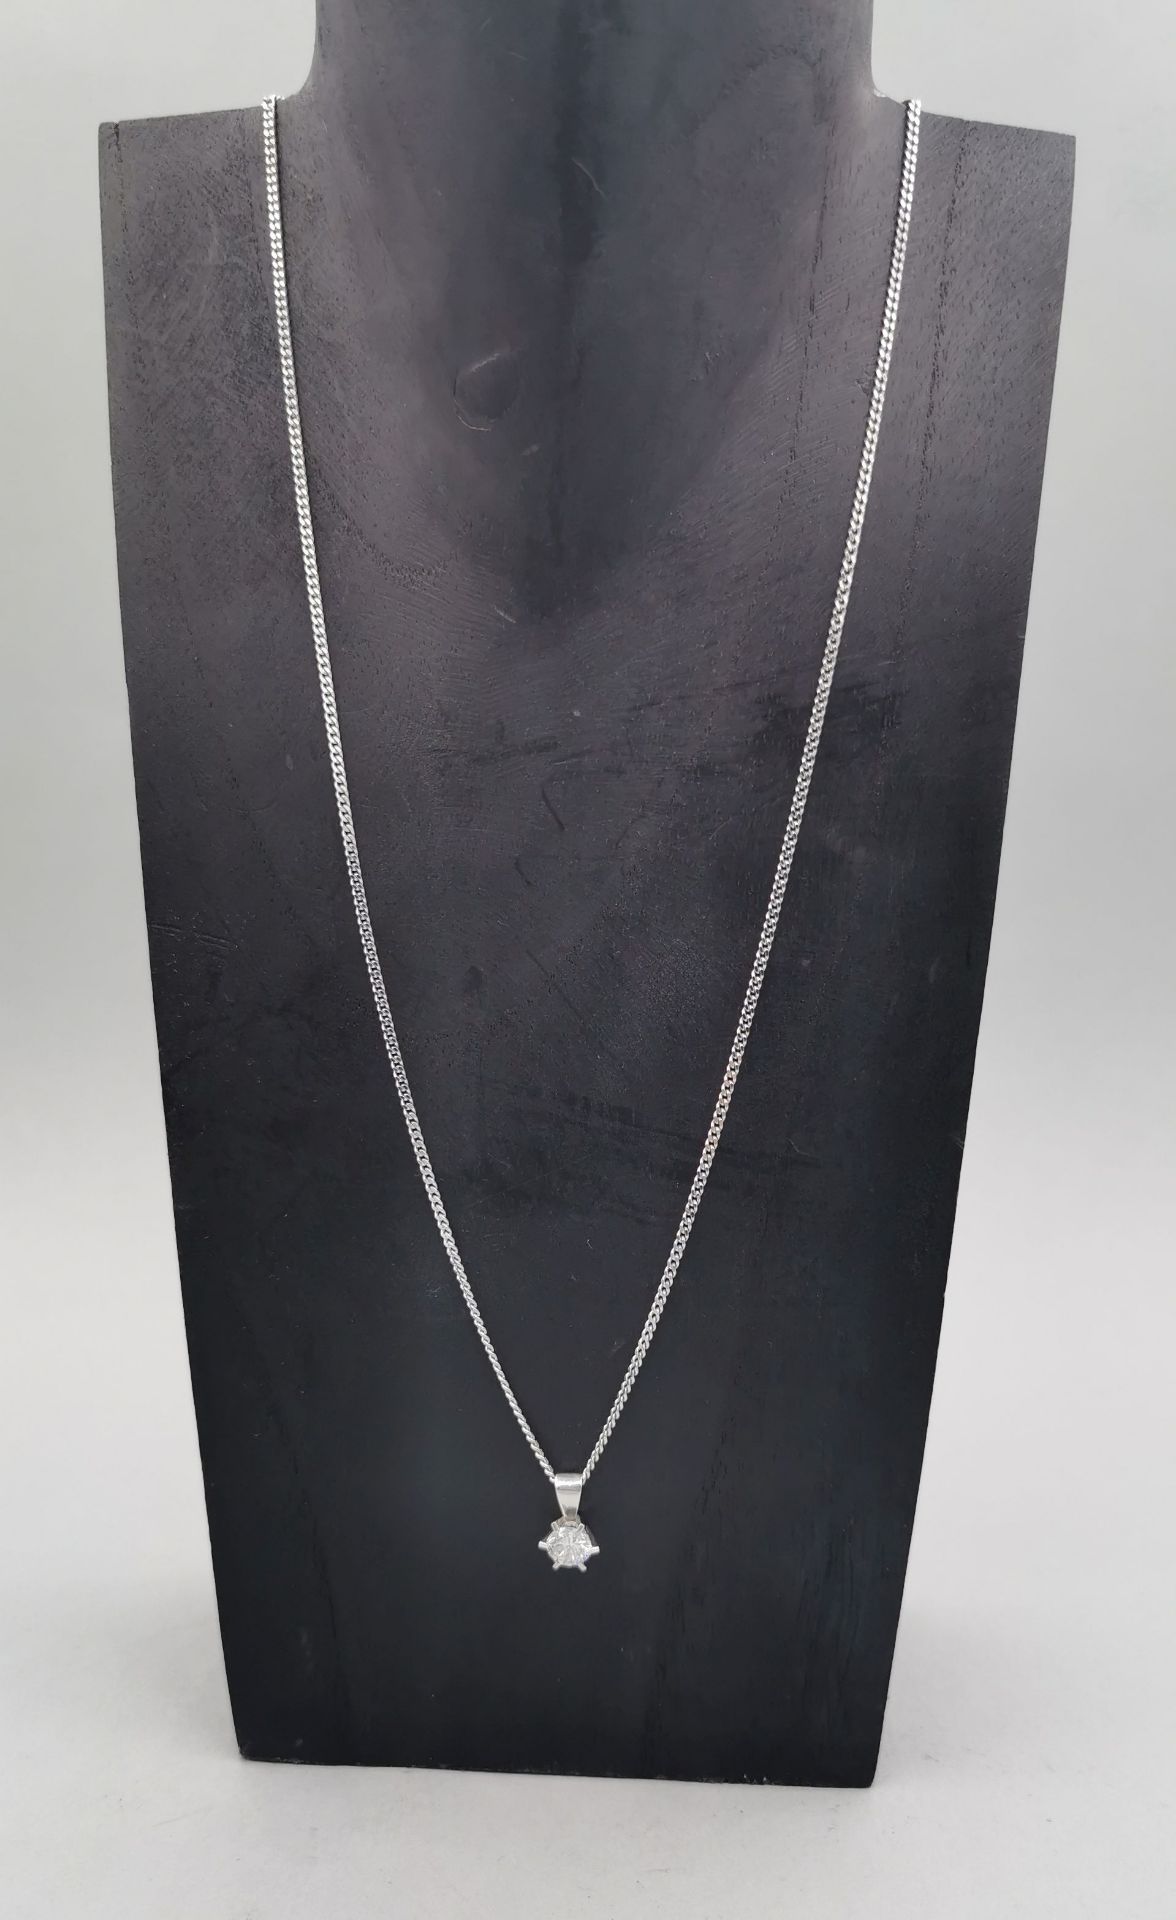 SOLITARY- PENDANT ON A CHAIN